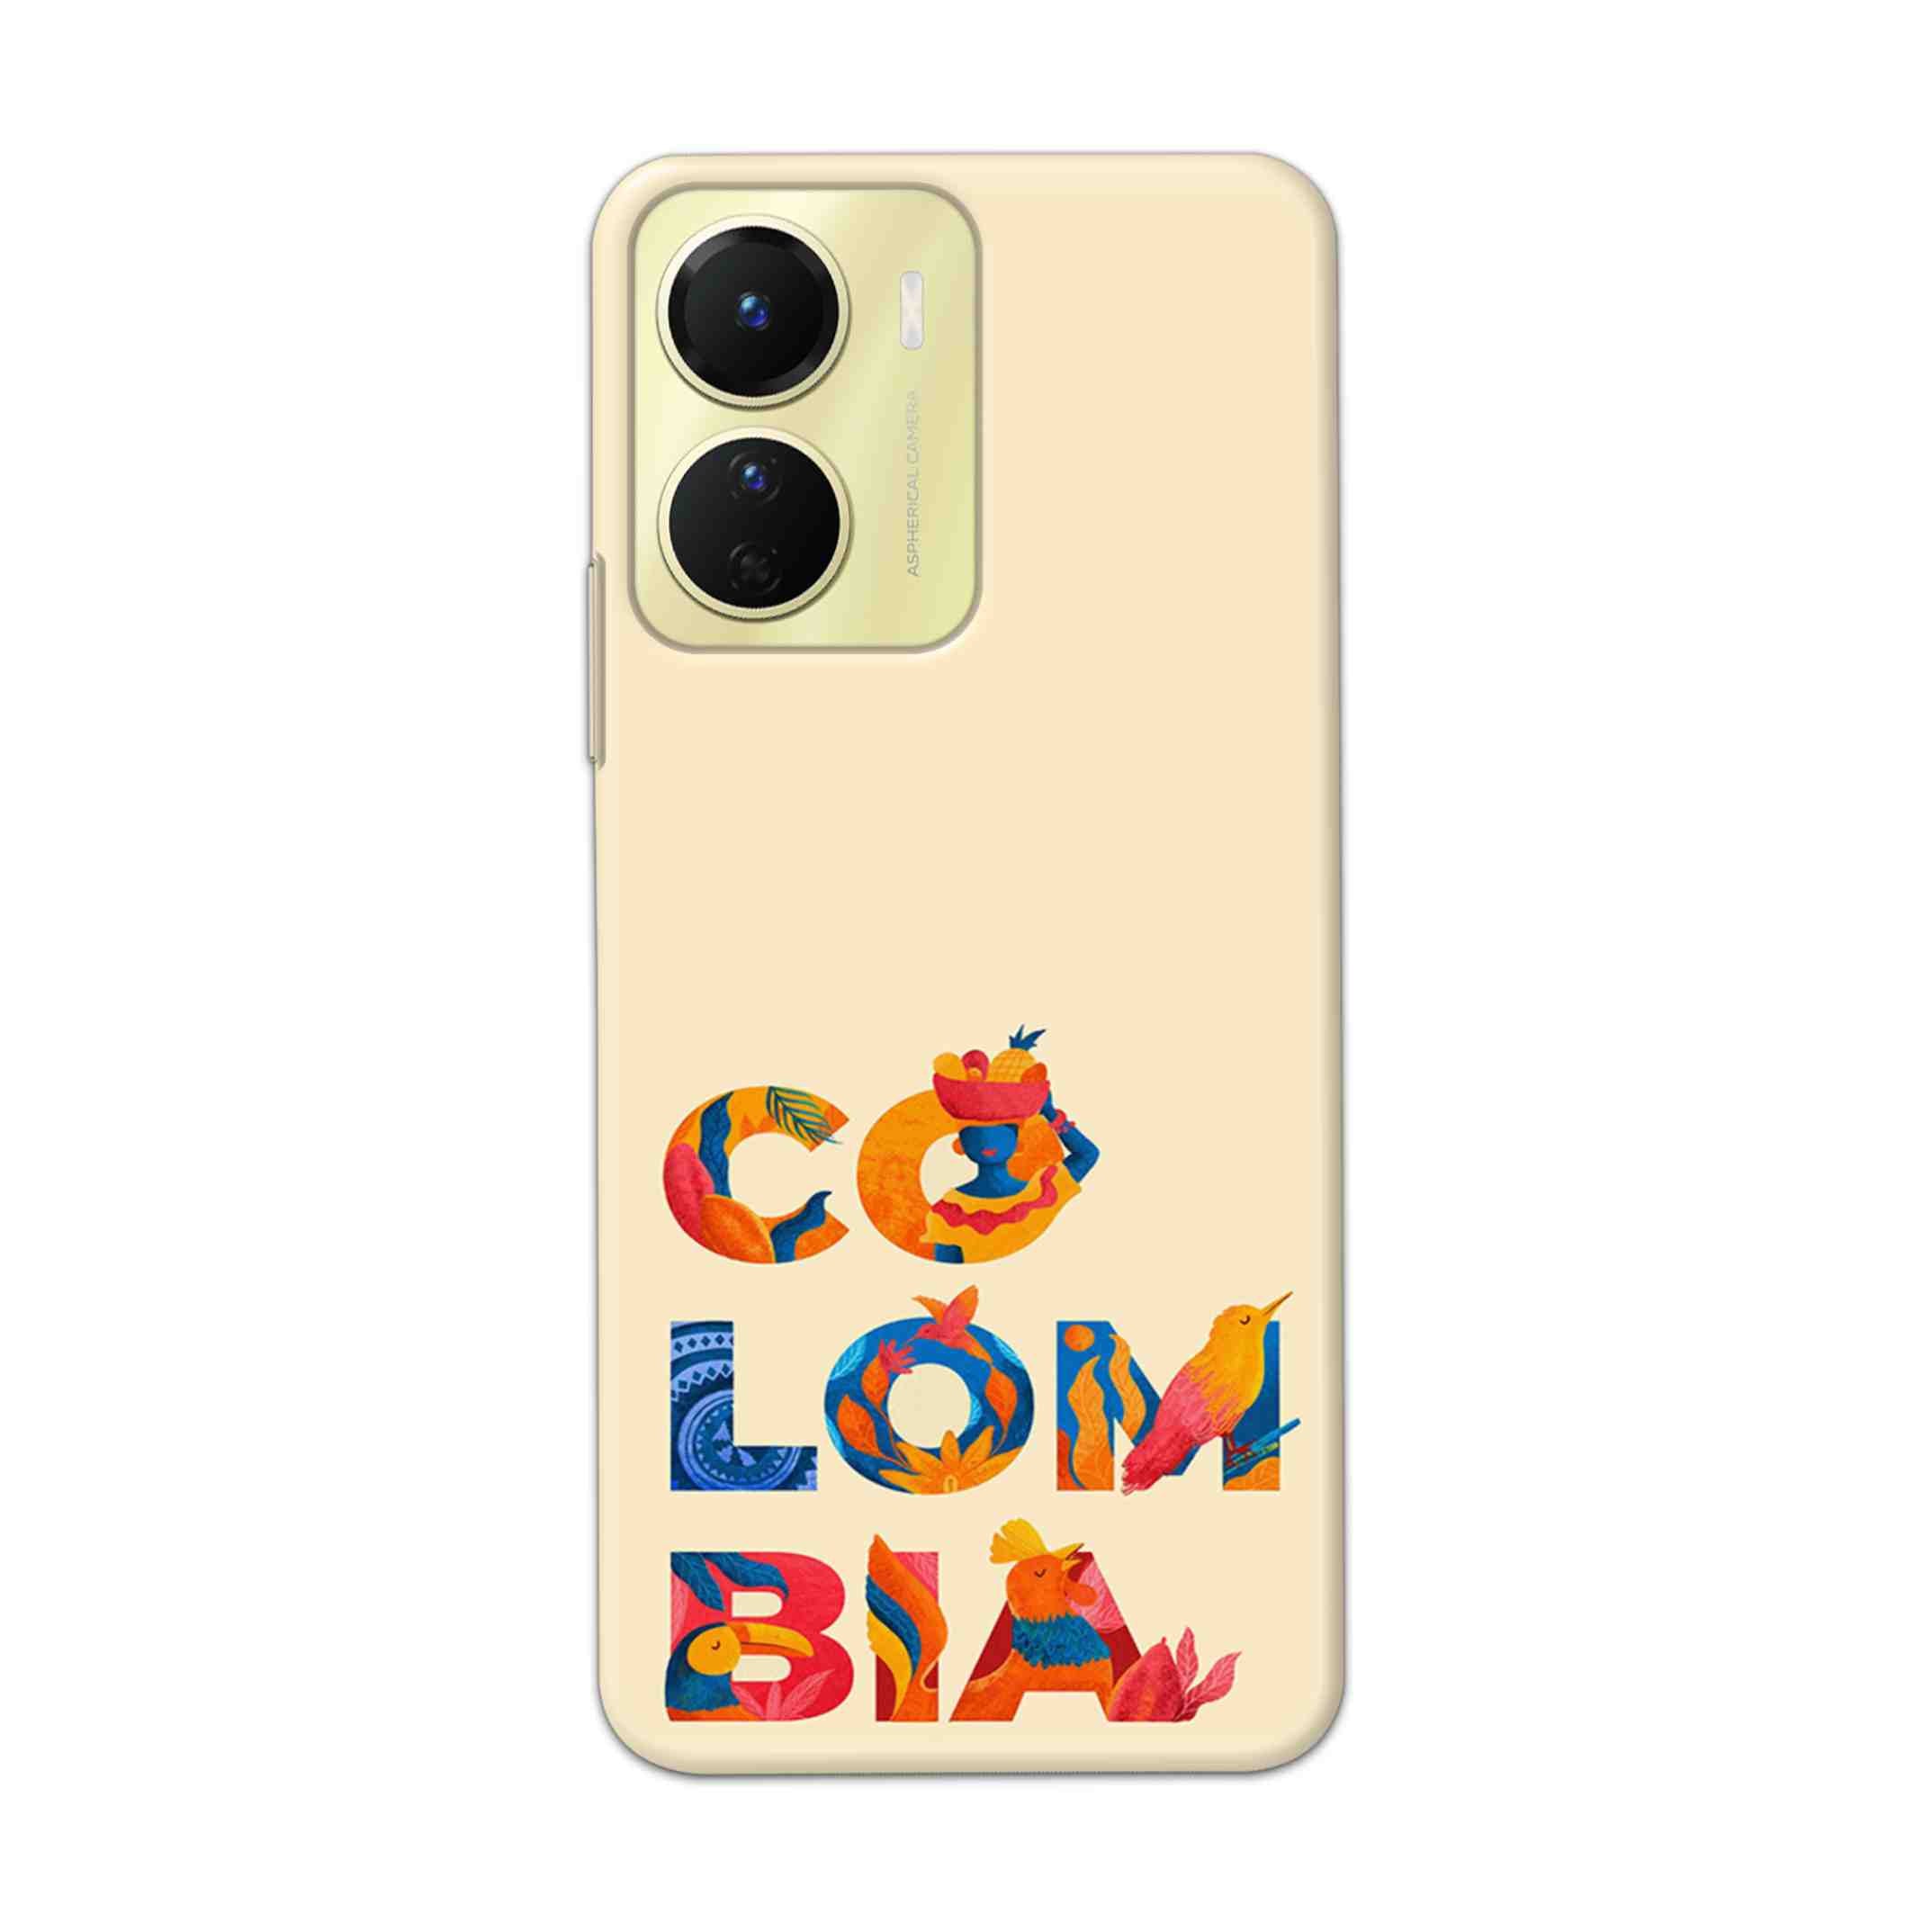 Buy Colombia Hard Back Mobile Phone Case Cover For Vivo Y16 Online